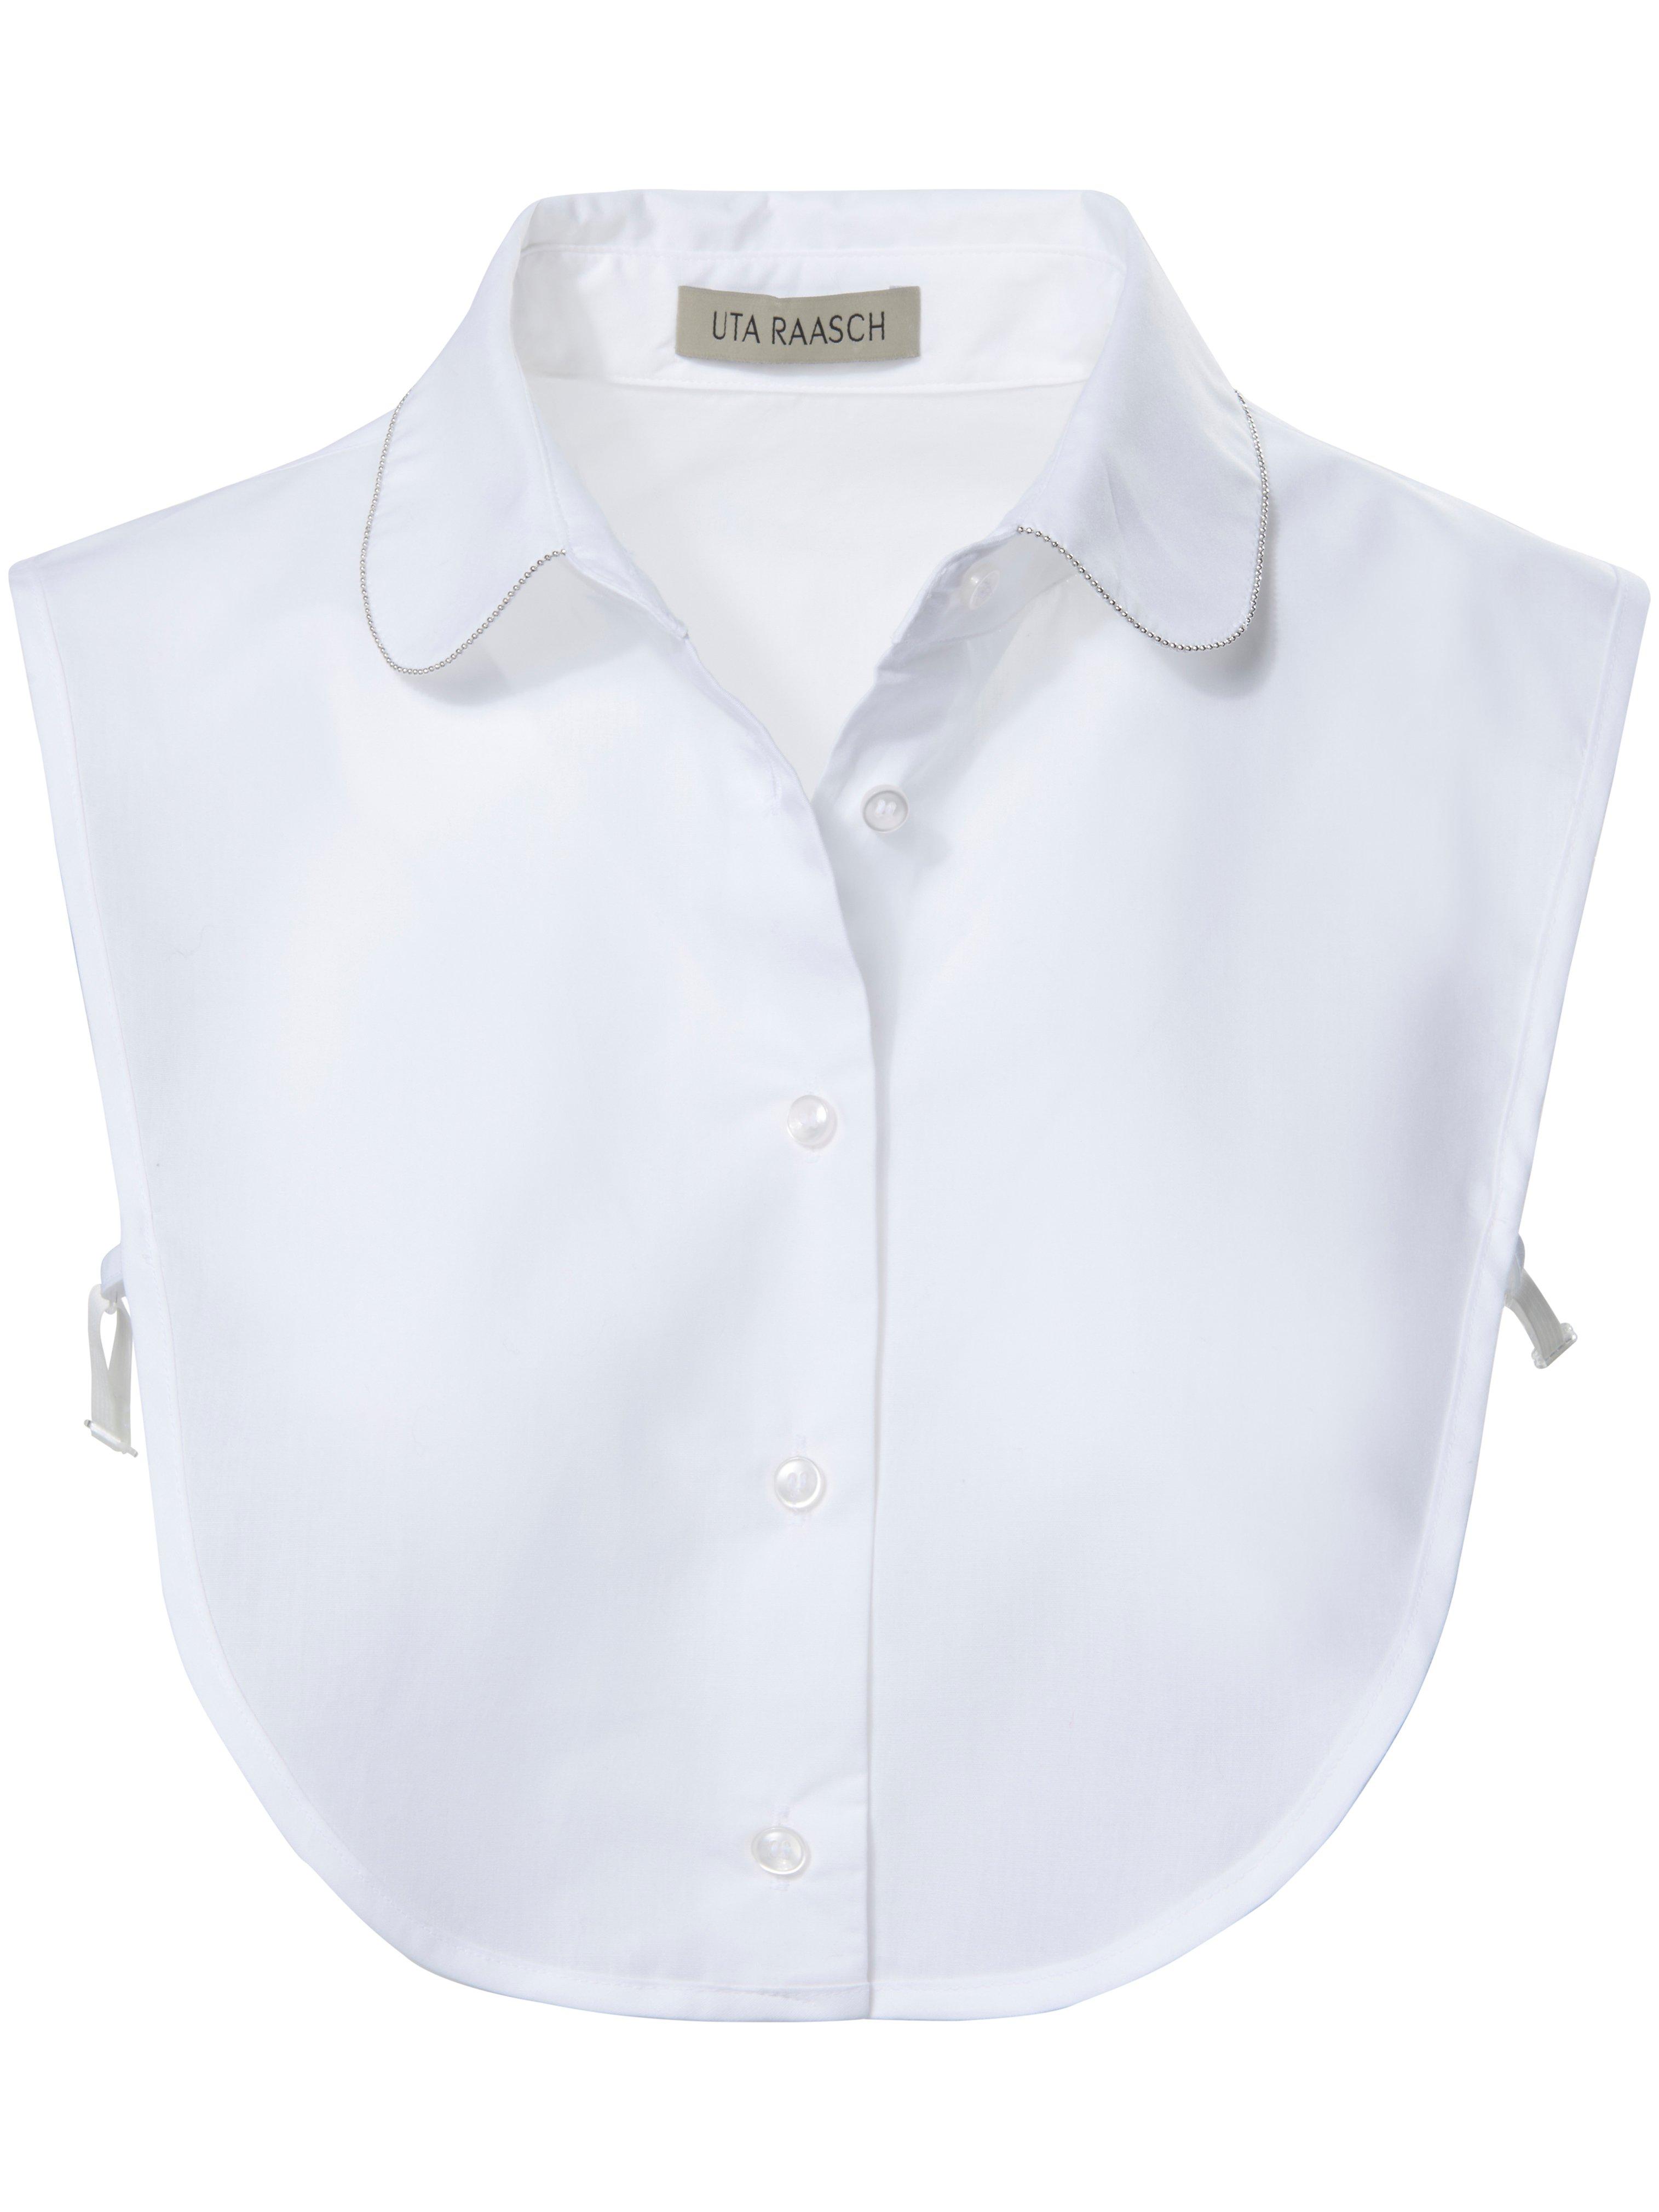 Image of Blouse collar in pure cotton Uta Raasch white